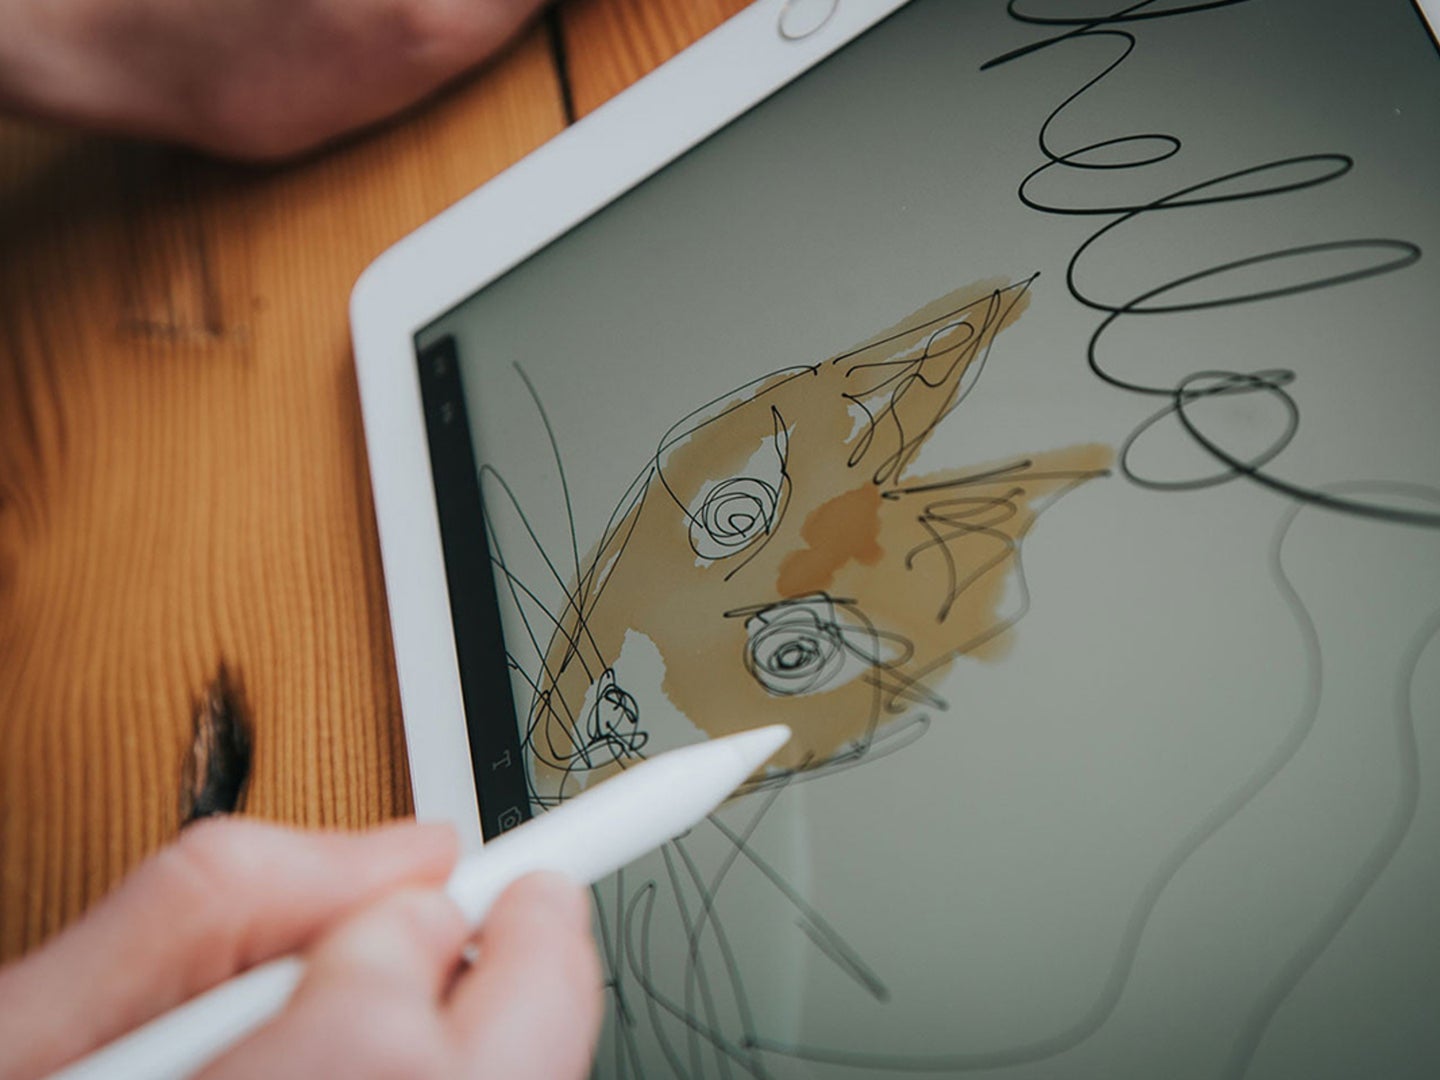 A person drawing on a refurbished iPad Pro